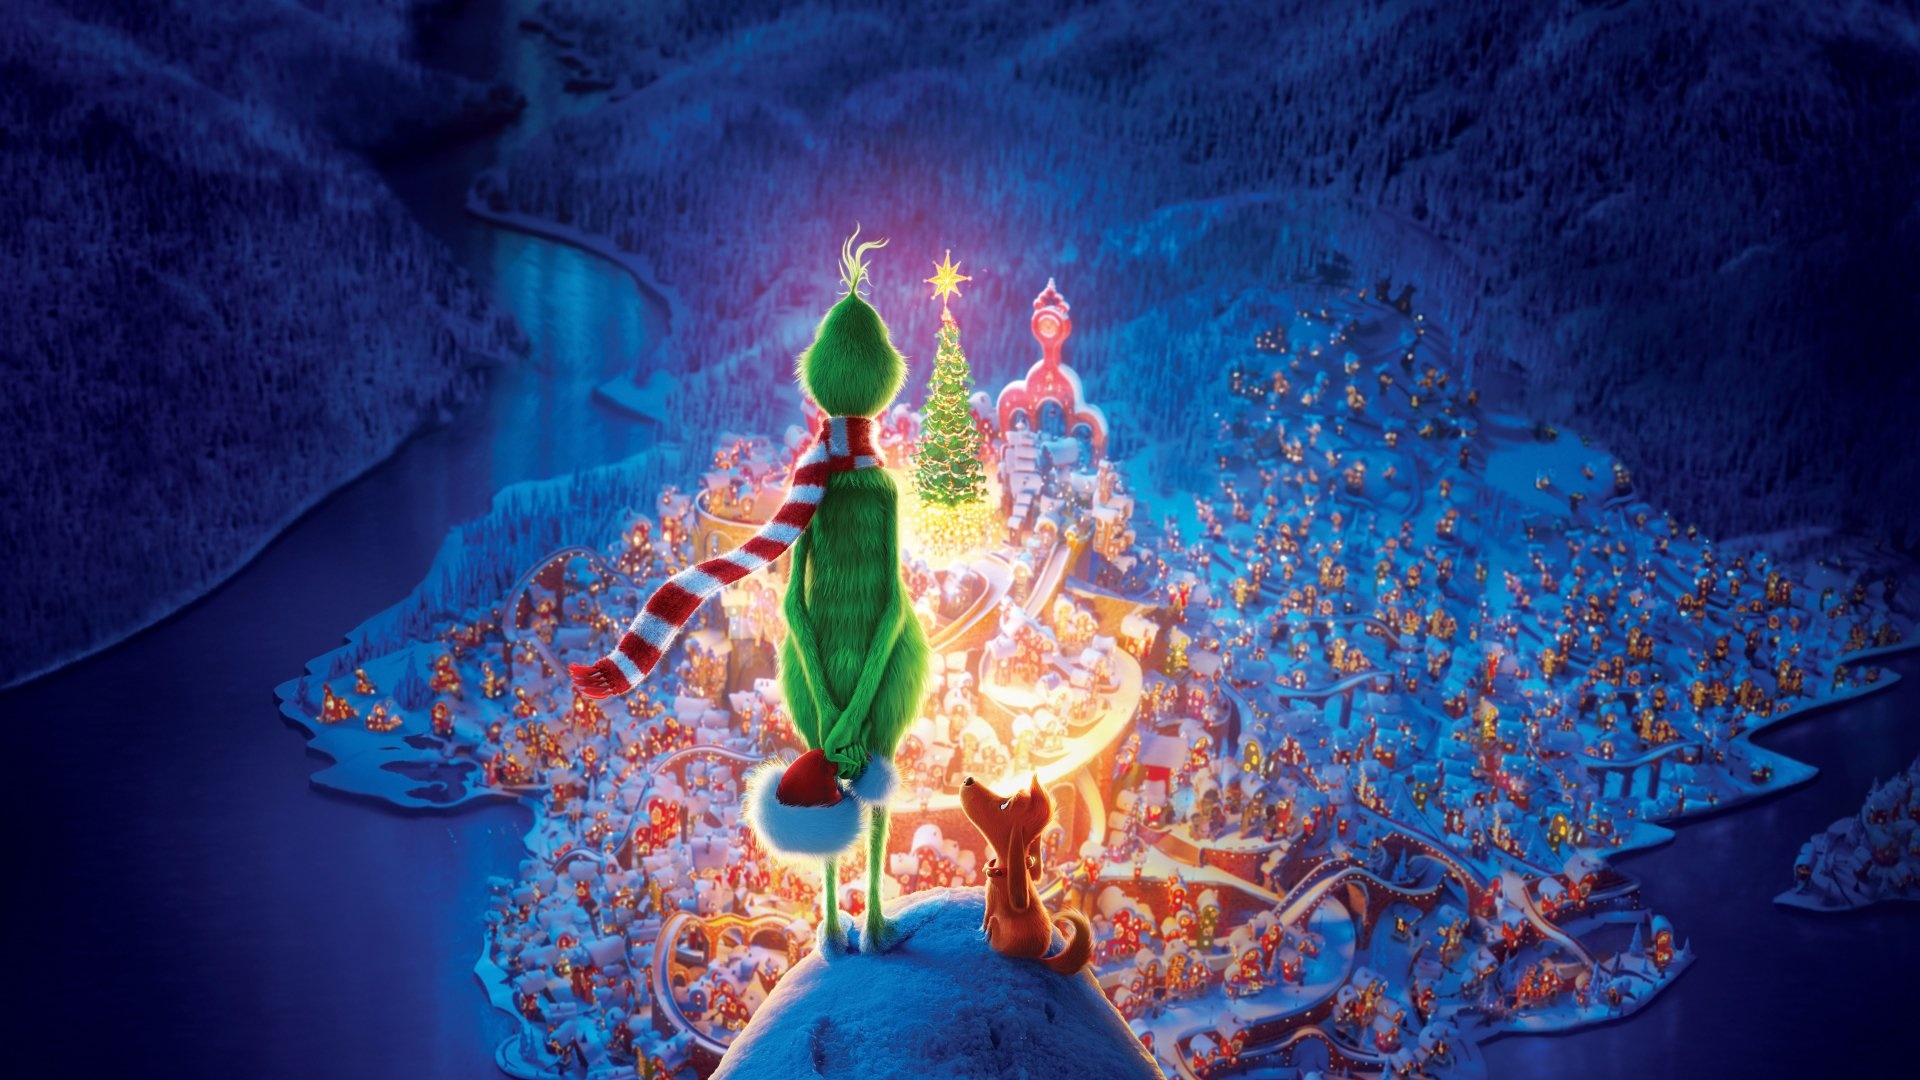 2 Grinch HD wallpapers, Stunning backgrounds, Whoville charm, Memorable movie moments, 1920x1080 Full HD Desktop